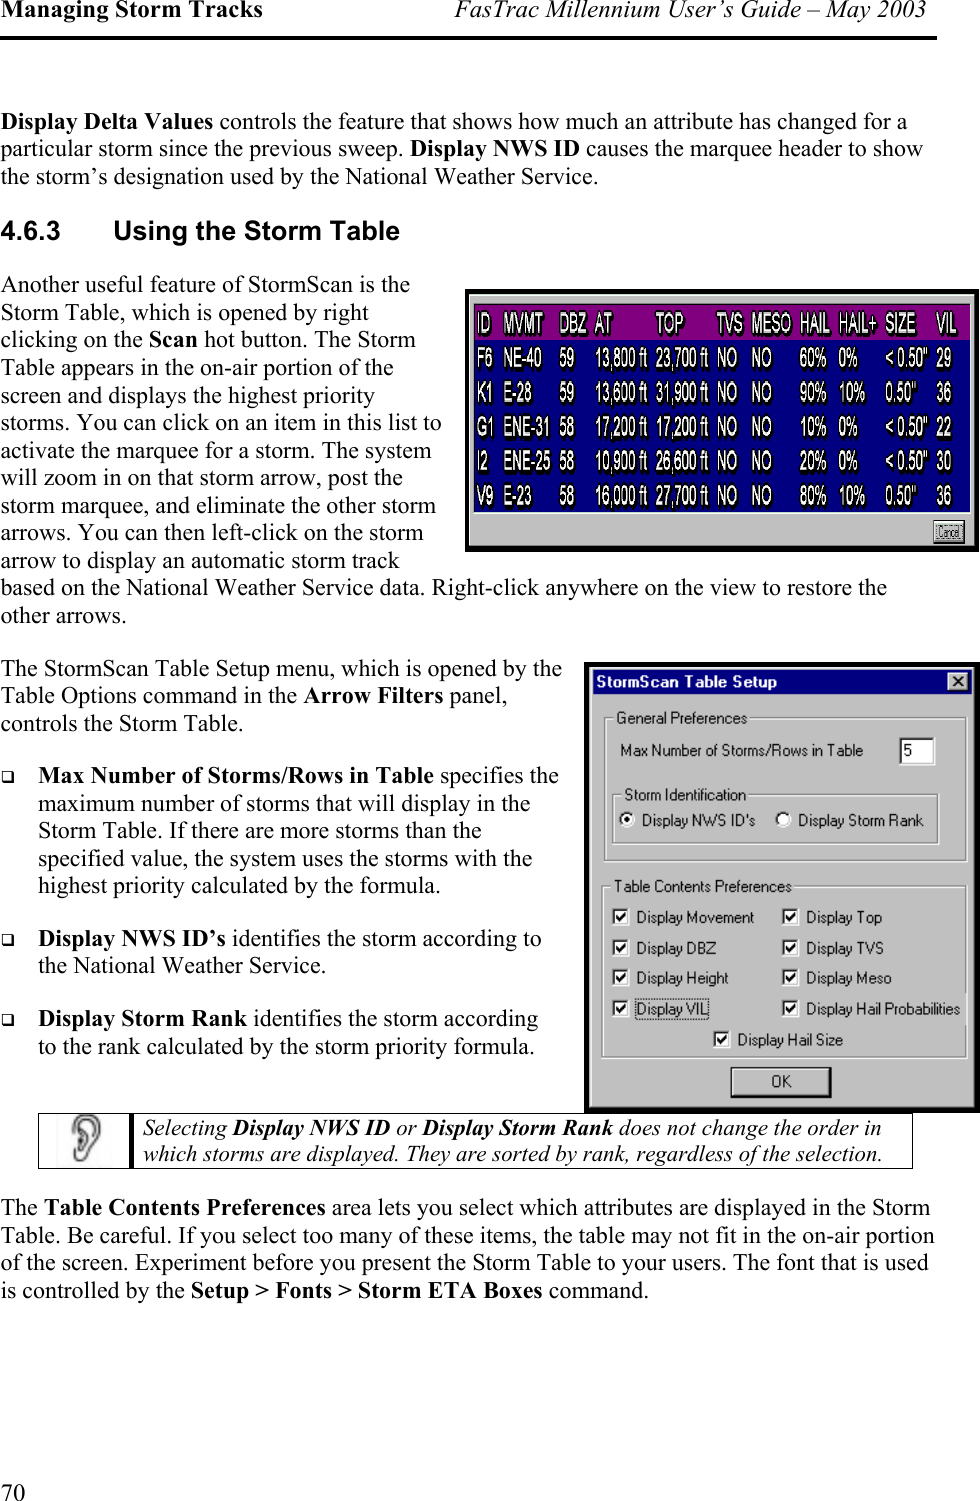 Managing Storm Tracks  FasTrac Millennium User’s Guide – May 2003 Display Delta Values controls the feature that shows how much an attribute has changed for a particular storm since the previous sweep. Display NWS ID causes the marquee header to show the storm’s designation used by the National Weather Service. 4.6.3  Using the Storm Table Another useful feature of StormScan is the Storm Table, which is opened by right clicking on the Scan hot button. The Storm Table appears in the on-air portion of the screen and displays the highest priority storms. You can click on an item in this list to activate the marquee for a storm. The system will zoom in on that storm arrow, post the storm marquee, and eliminate the other storm arrows. You can then left-click on the storm arrow to display an automatic storm track based on the National Weather Service data. Right-click anywhere on the view to restore the other arrows. The StormScan Table Setup menu, which is opened by the Table Options command in the Arrow Filters panel, controls the Storm Table.   Max Number of Storms/Rows in Table specifies the maximum number of storms that will display in the Storm Table. If there are more storms than the specified value, the system uses the storms with the highest priority calculated by the formula.    Display NWS ID’s identifies the storm according to the National Weather Service.    Display Storm Rank identifies the storm according to the rank calculated by the storm priority formula.  Selecting Display NWS ID or Display Storm Rank does not change the order in which storms are displayed. They are sorted by rank, regardless of the selection. The Table Contents Preferences area lets you select which attributes are displayed in the Storm Table. Be careful. If you select too many of these items, the table may not fit in the on-air portion of the screen. Experiment before you present the Storm Table to your users. The font that is used is controlled by the Setup &gt; Fonts &gt; Storm ETA Boxes command. 70 